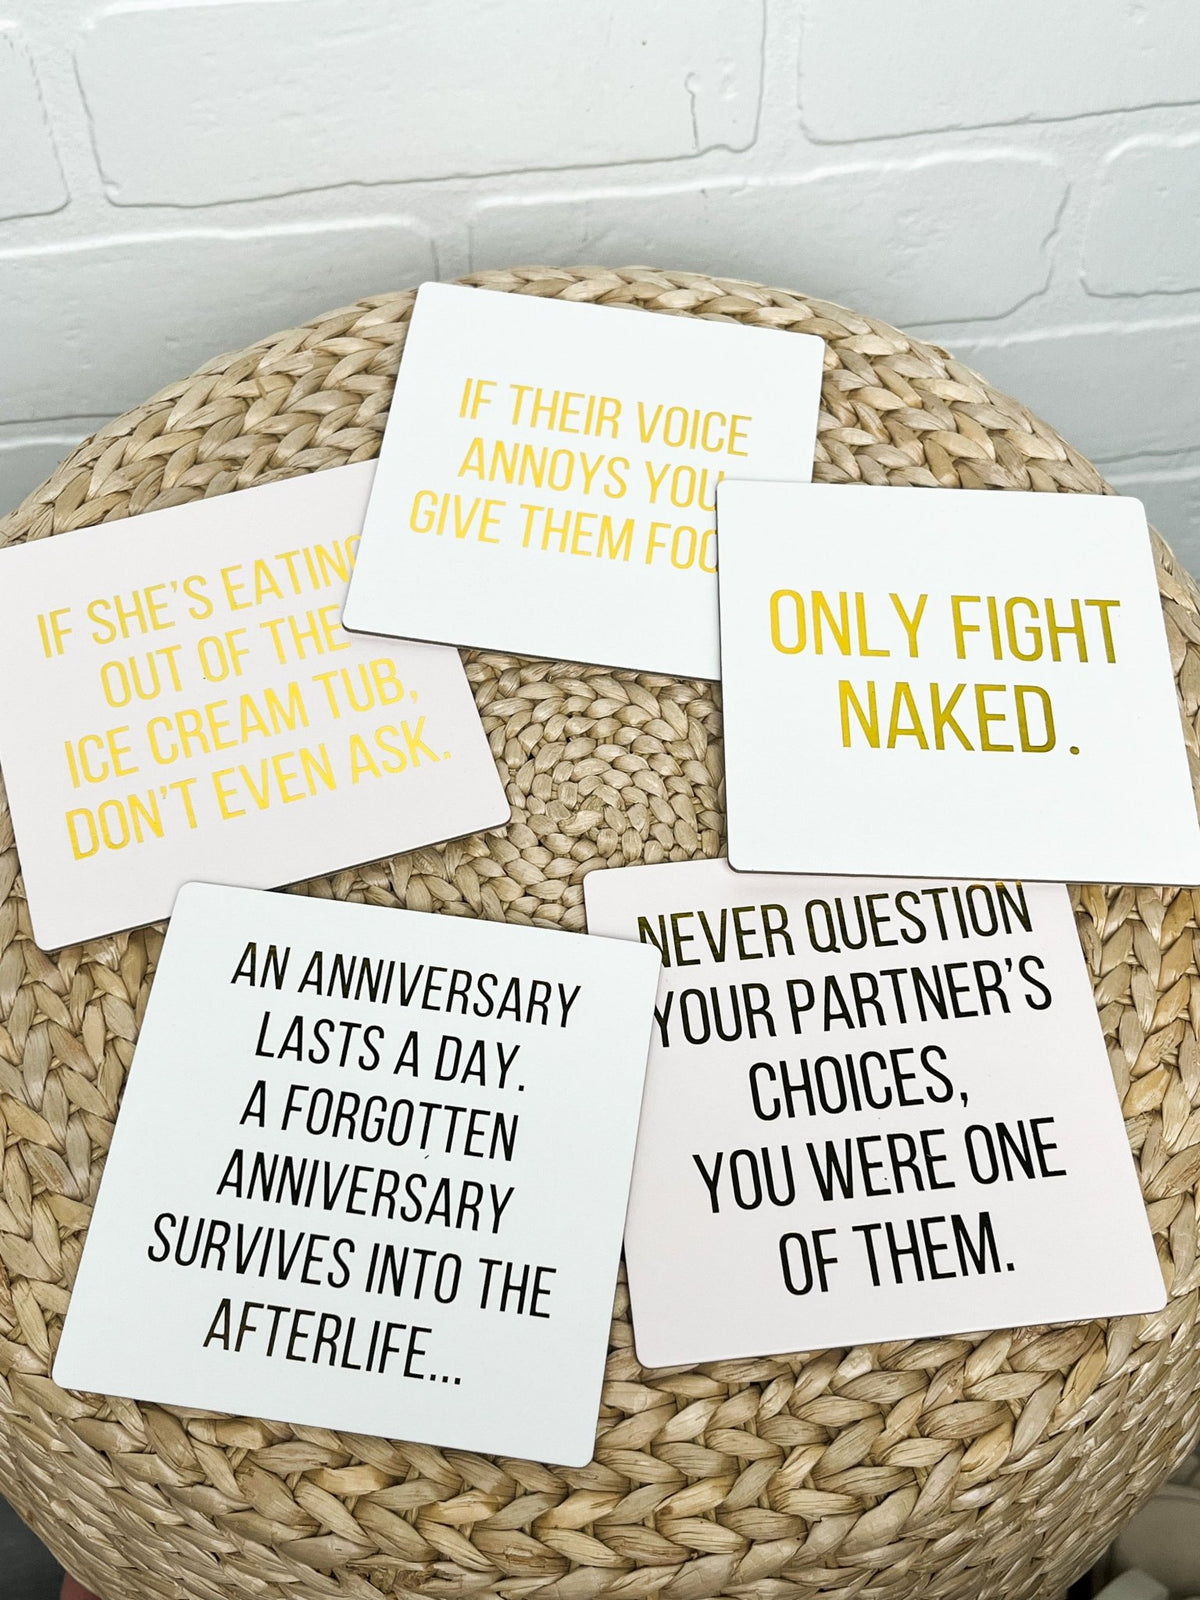 Marriage advice humor coasters set of 10 - Trendy Gifts at Lush Fashion Lounge Boutique in Oklahoma City